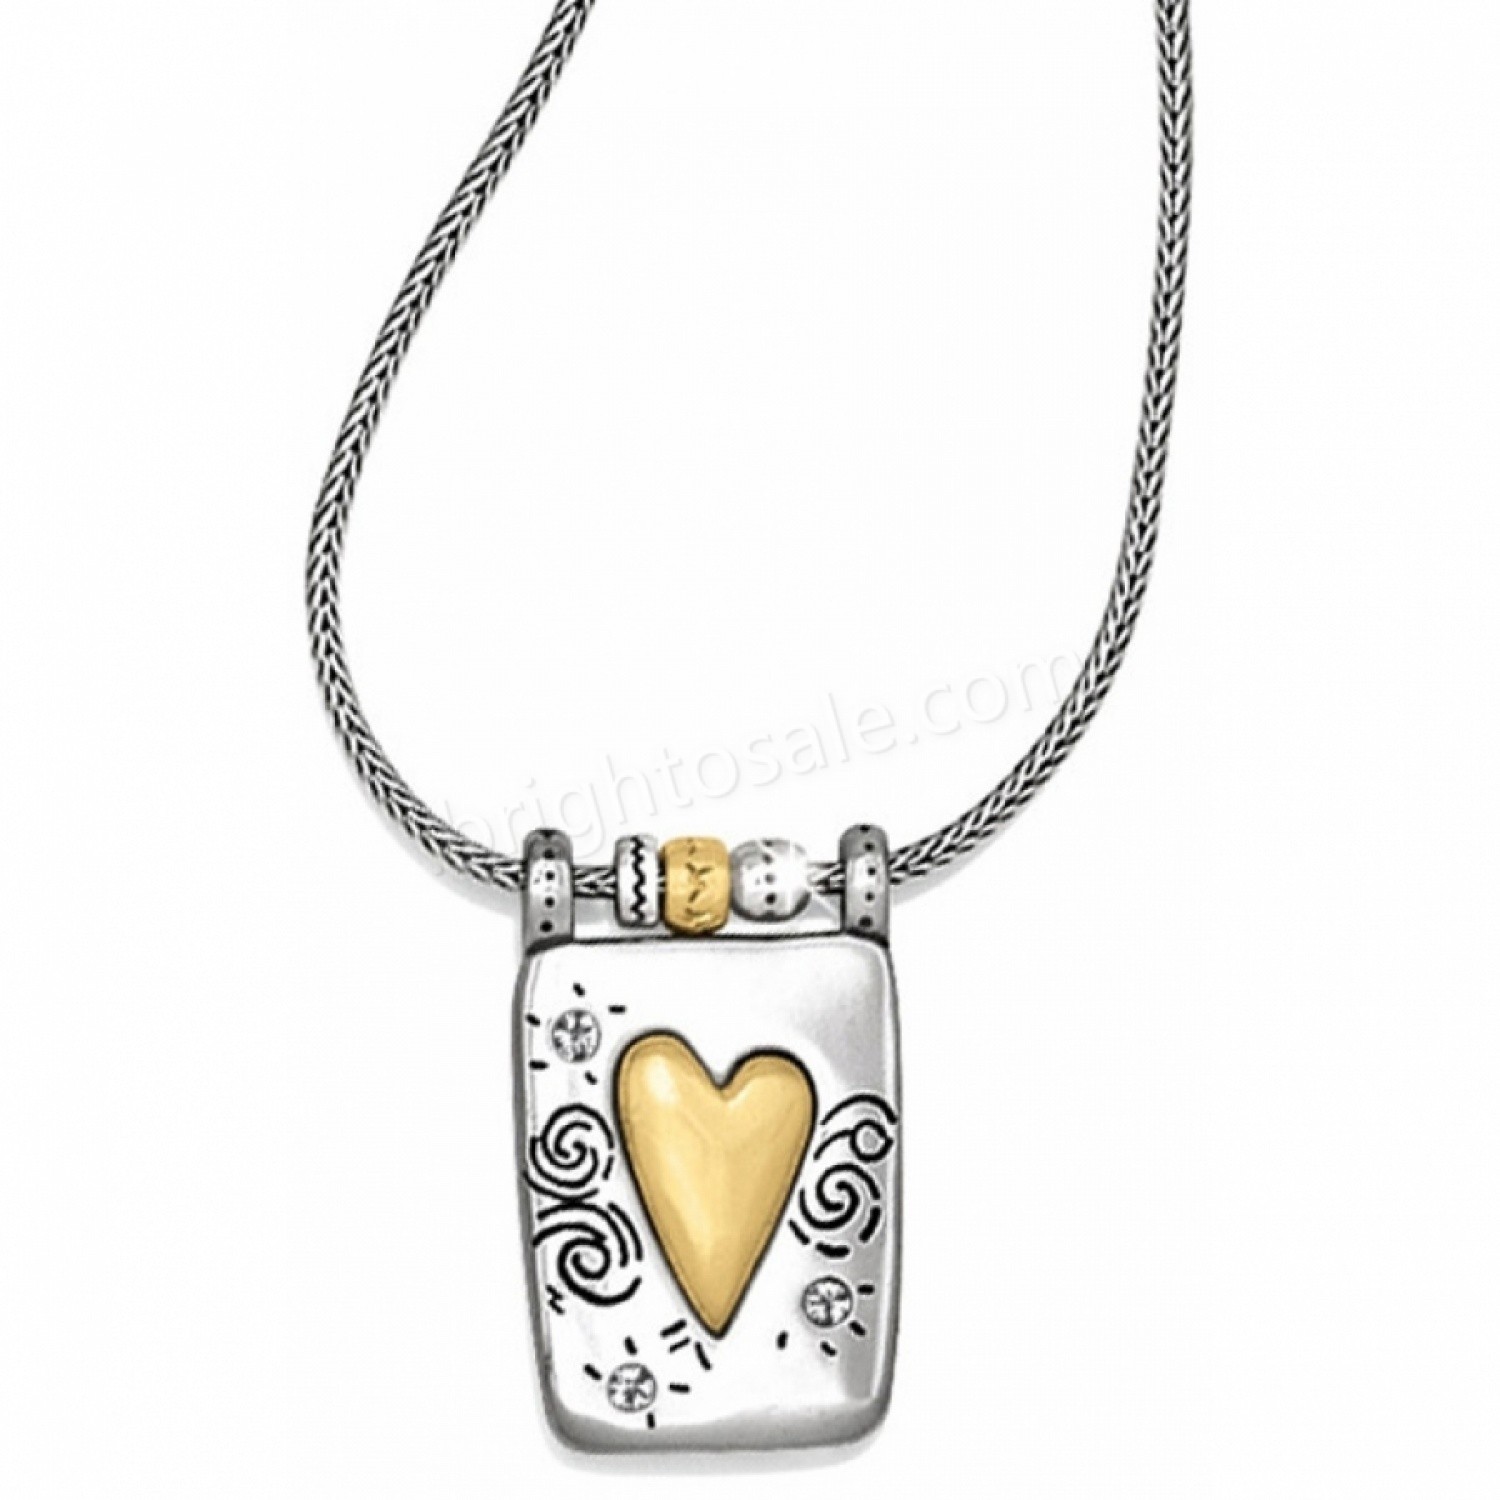 Brighton Collectibles & Online Discount Remember Your Heart Necklace - Brighton Collectibles & Online Discount Remember Your Heart Necklace